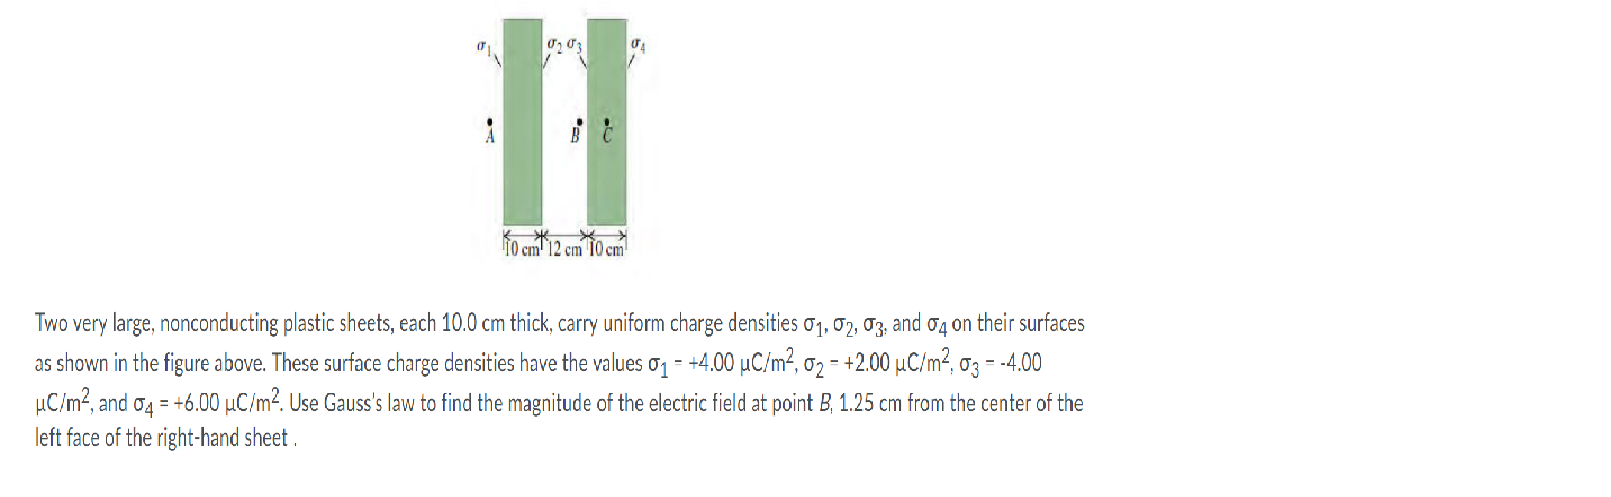 10 cm'12 cm 10 cm
Two very large, nonconducting plastic sheets, each 10.0 cm thick, carry uniform charge densities oq, o2, T3, and o4 on their surfaces
as shown in the figure above. These surface charge densities have the values o1 = +4.00 µC/m², o2 - +2.00 µC/m², 03 = -4.00
µC/m?, and o4 = +6.00 µC/m². Use Gauss's law to find the magnitude of the electric field at point B, 1.25 cm from the center of the
left face of the right-hand sheet .
%3D
